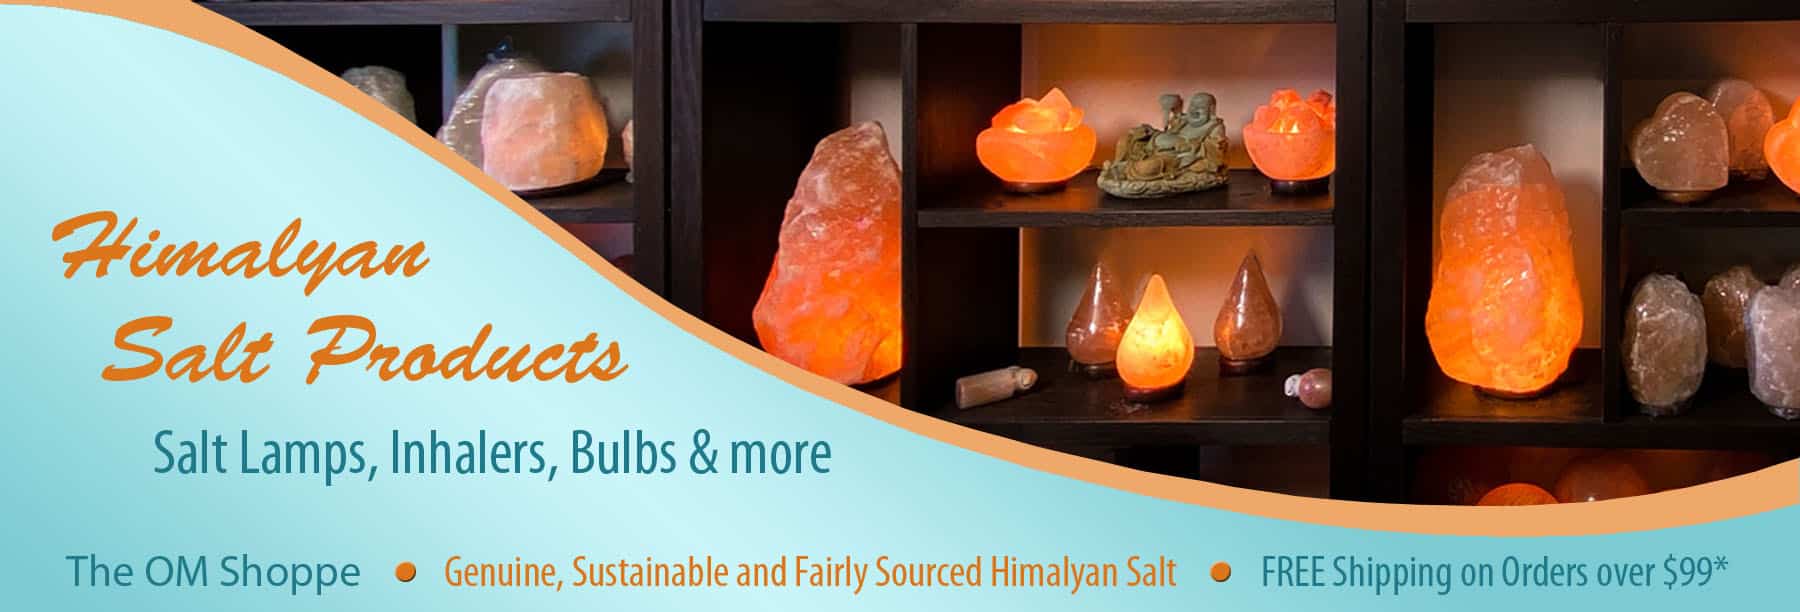 The OM Shoppe Himalayan Salt Lamps, bulbs, inhalers, and other salt products